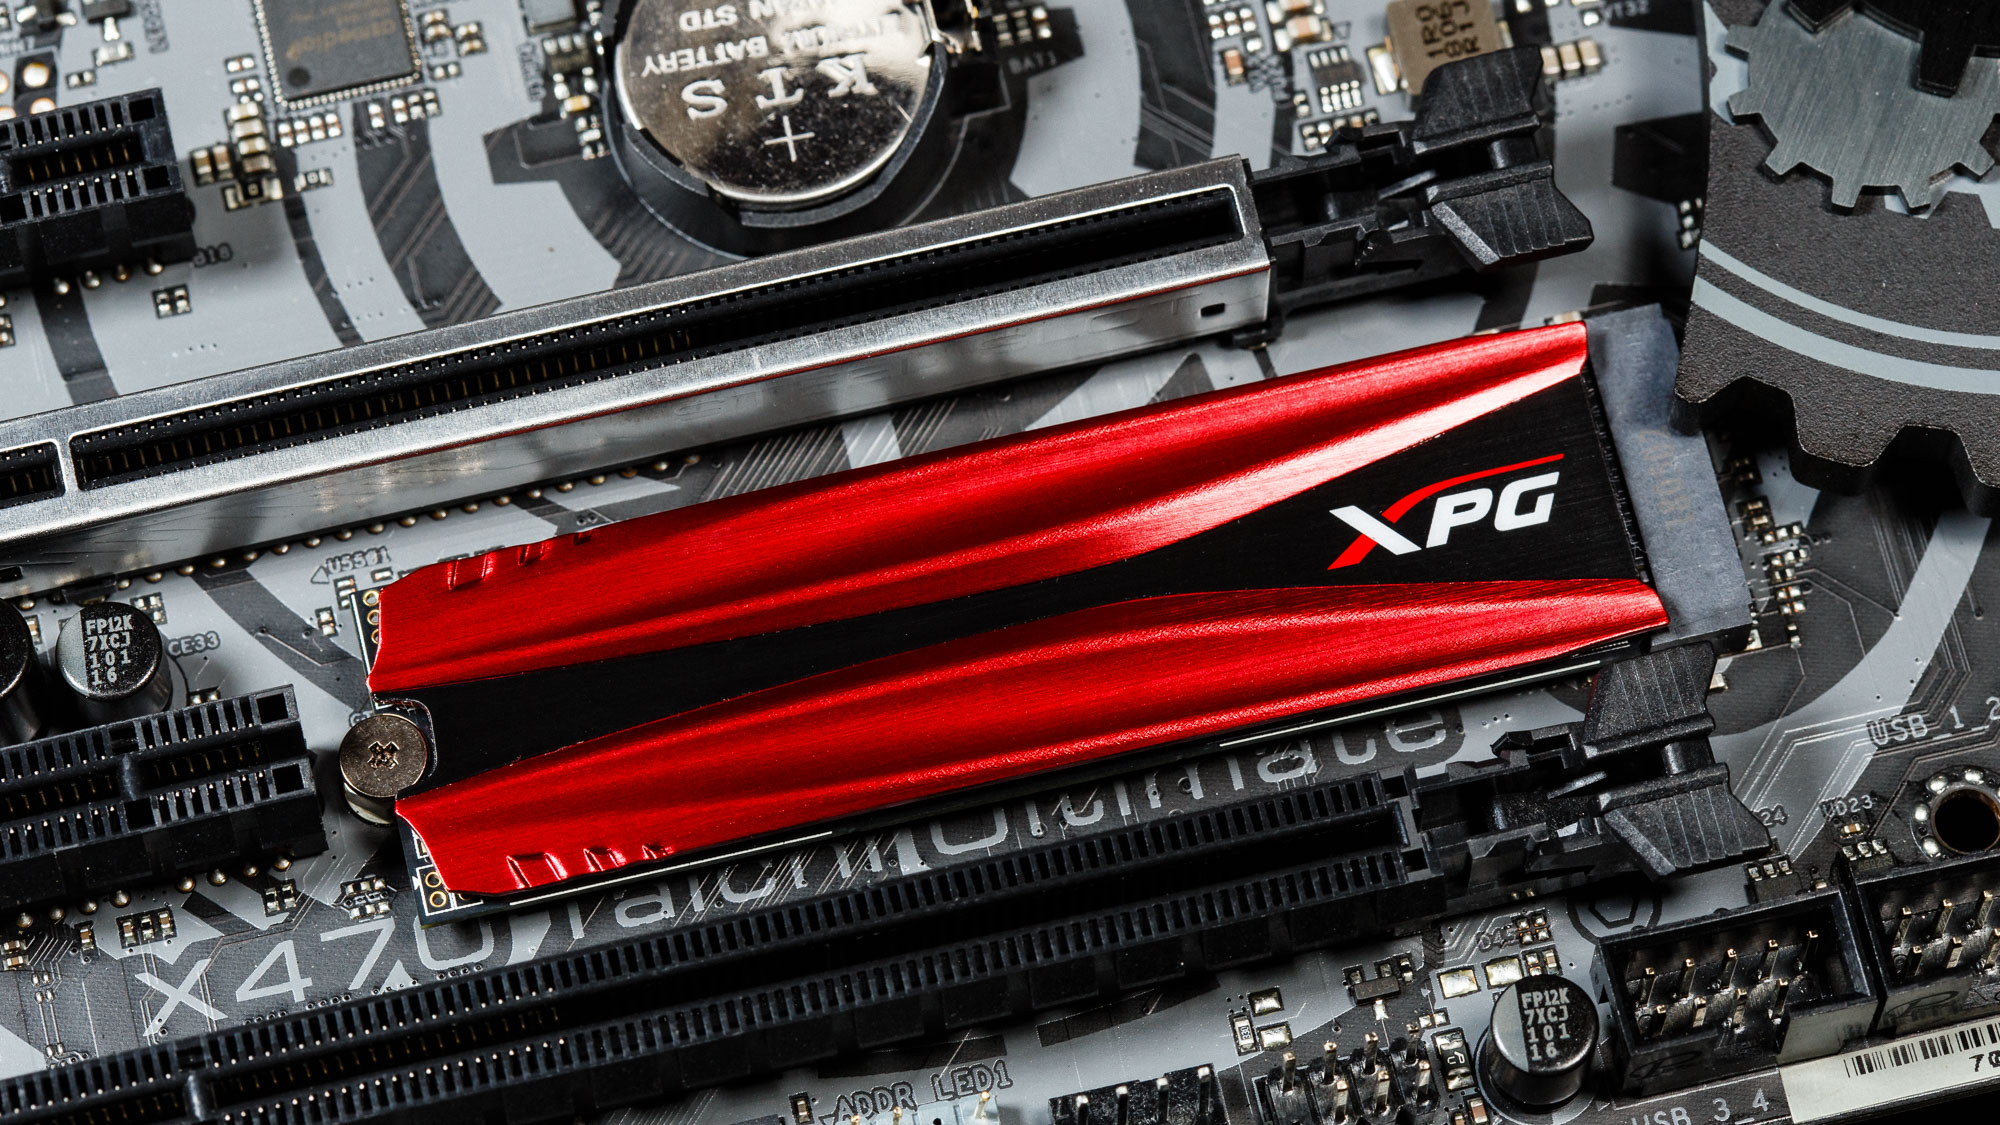 1TB Performance Results - Adata XPG Gammix S11 Pro M.2 NVMe SSD Review: Fast, Flashy and Affordable | Tom's Hardware